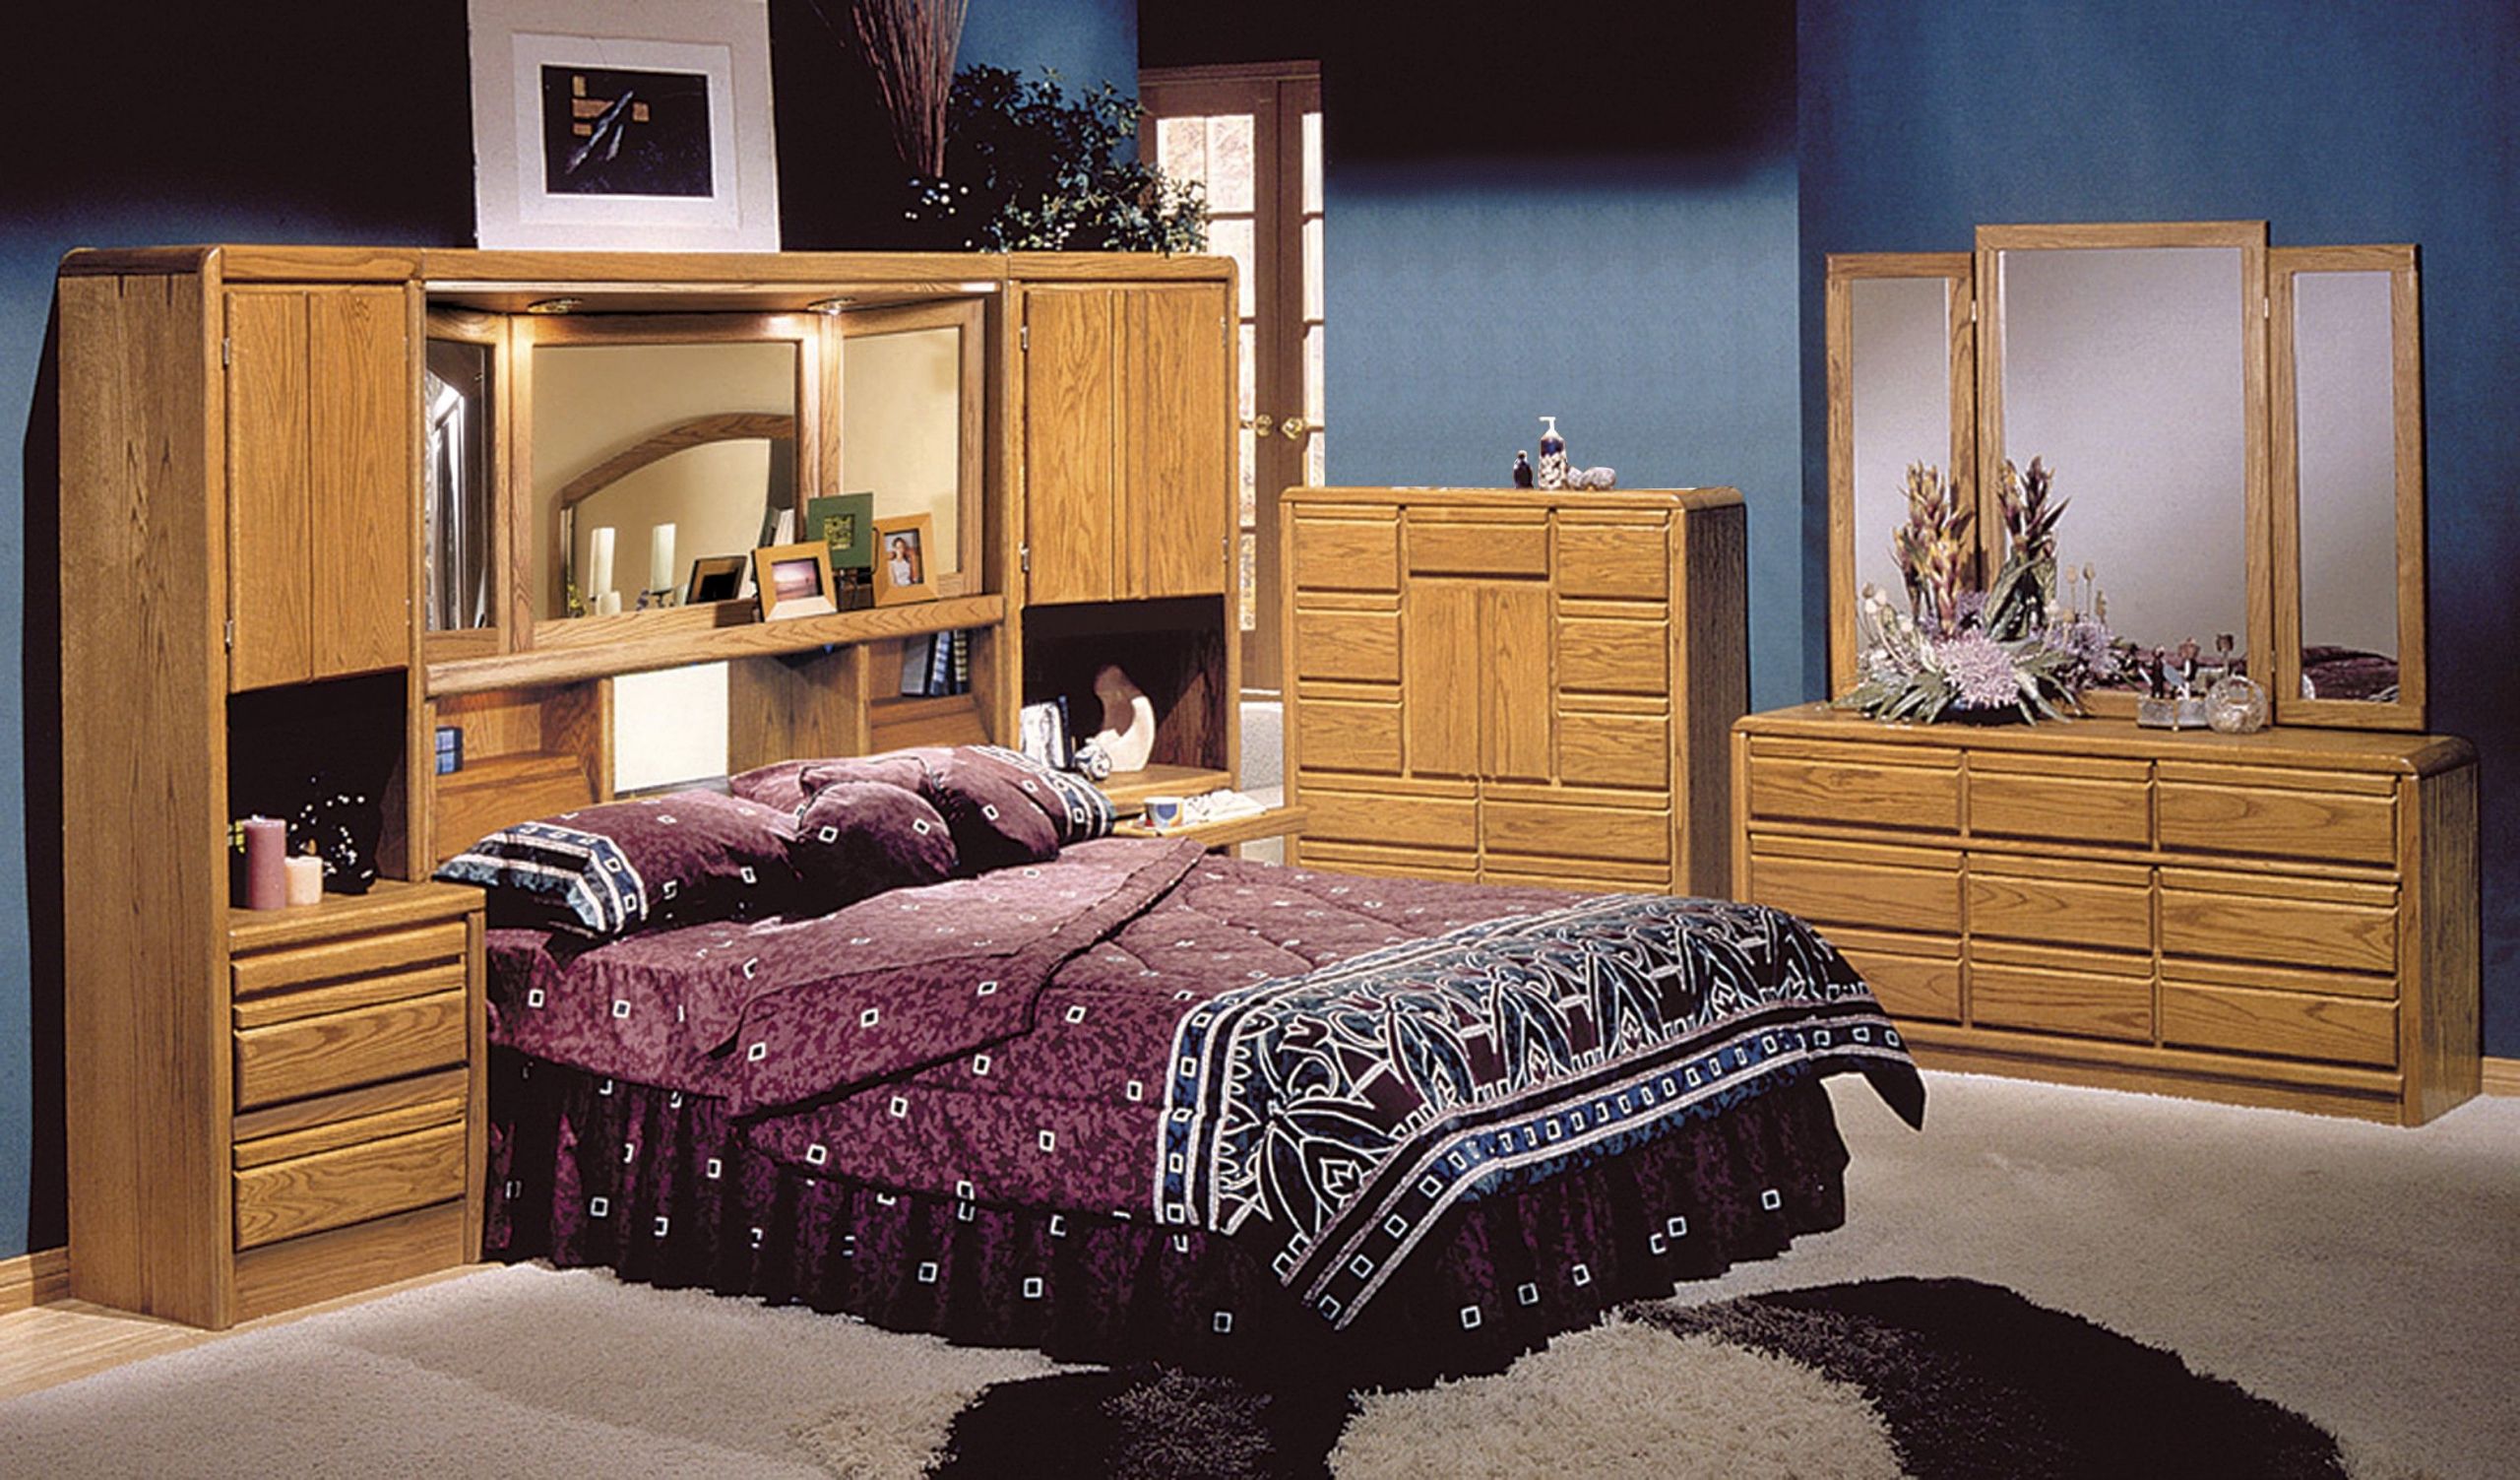 Wall Unit Bedroom Furniture
 Astonishing Bedroom Wall Units for Interior and Decoration